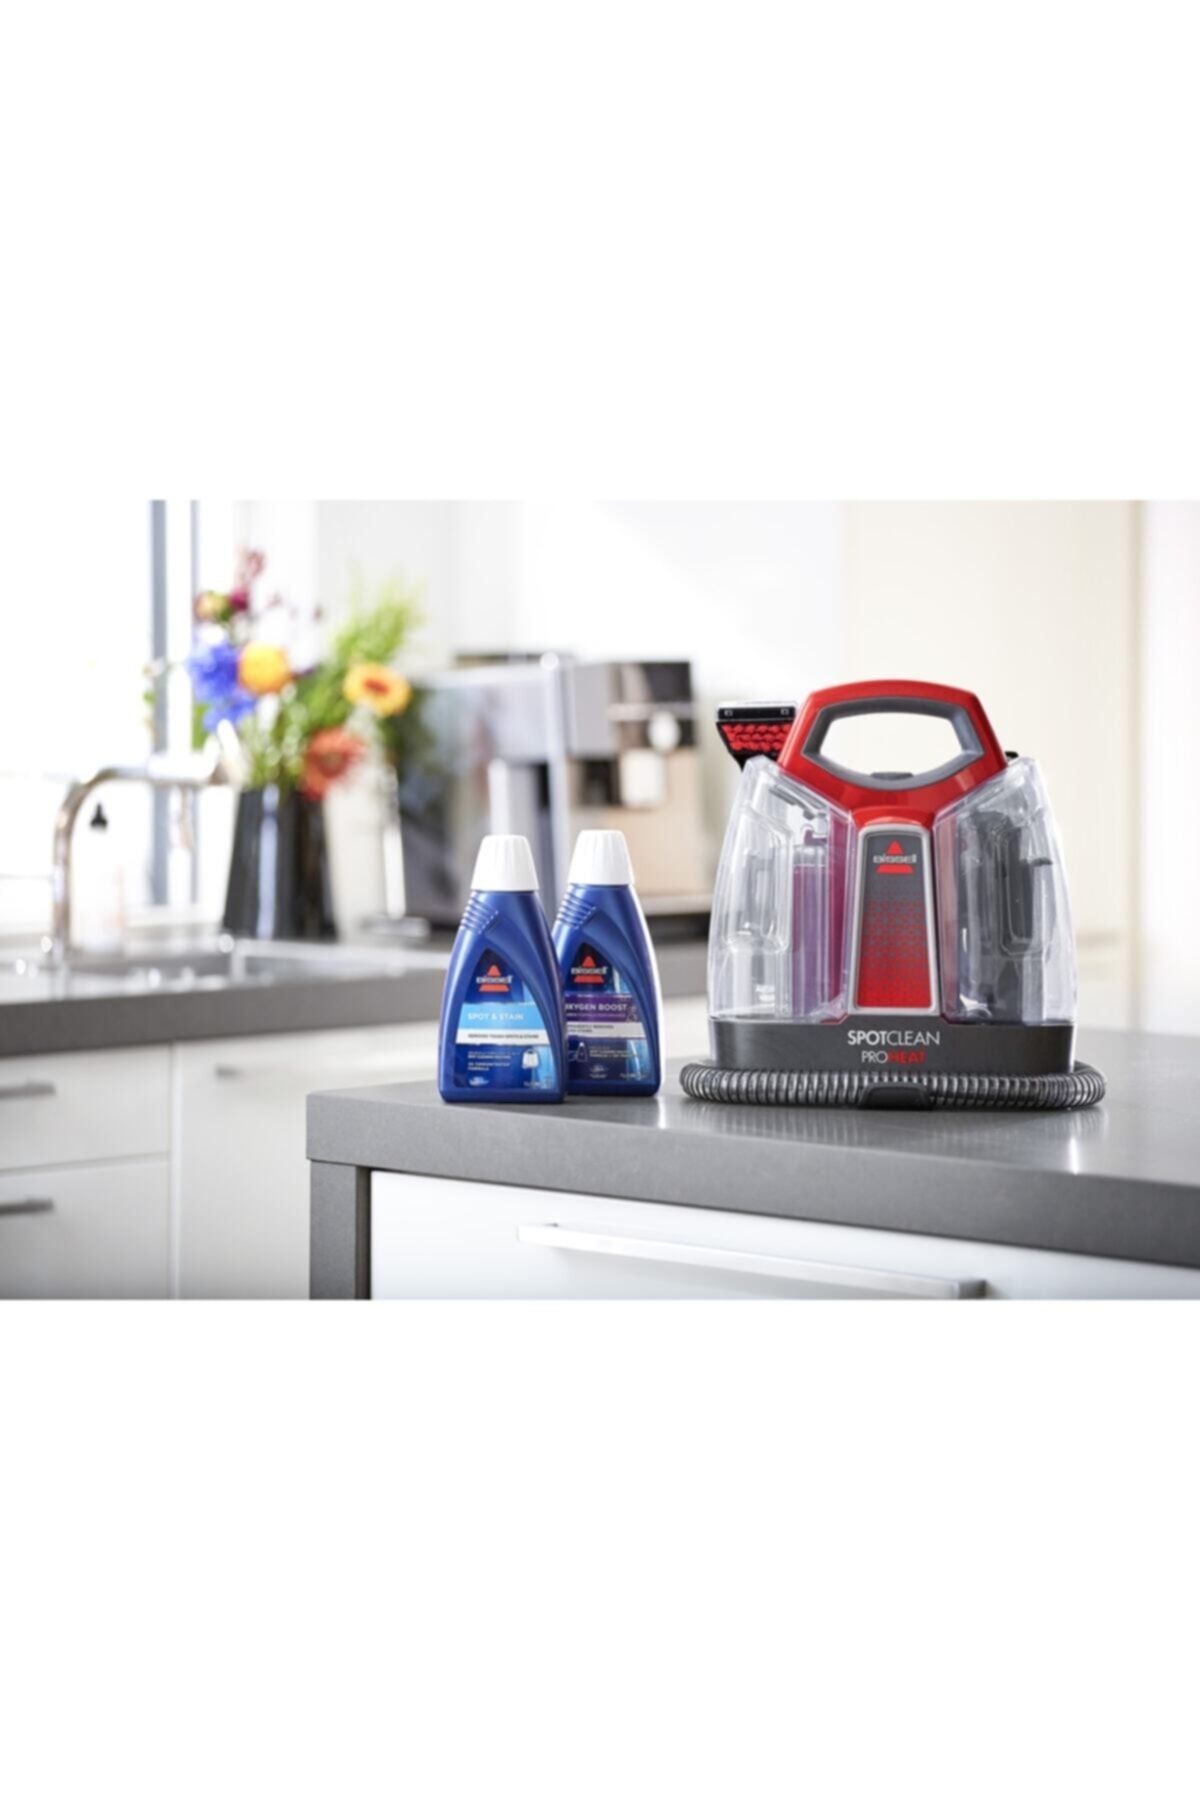 Bissell spotclean - Cdiscount